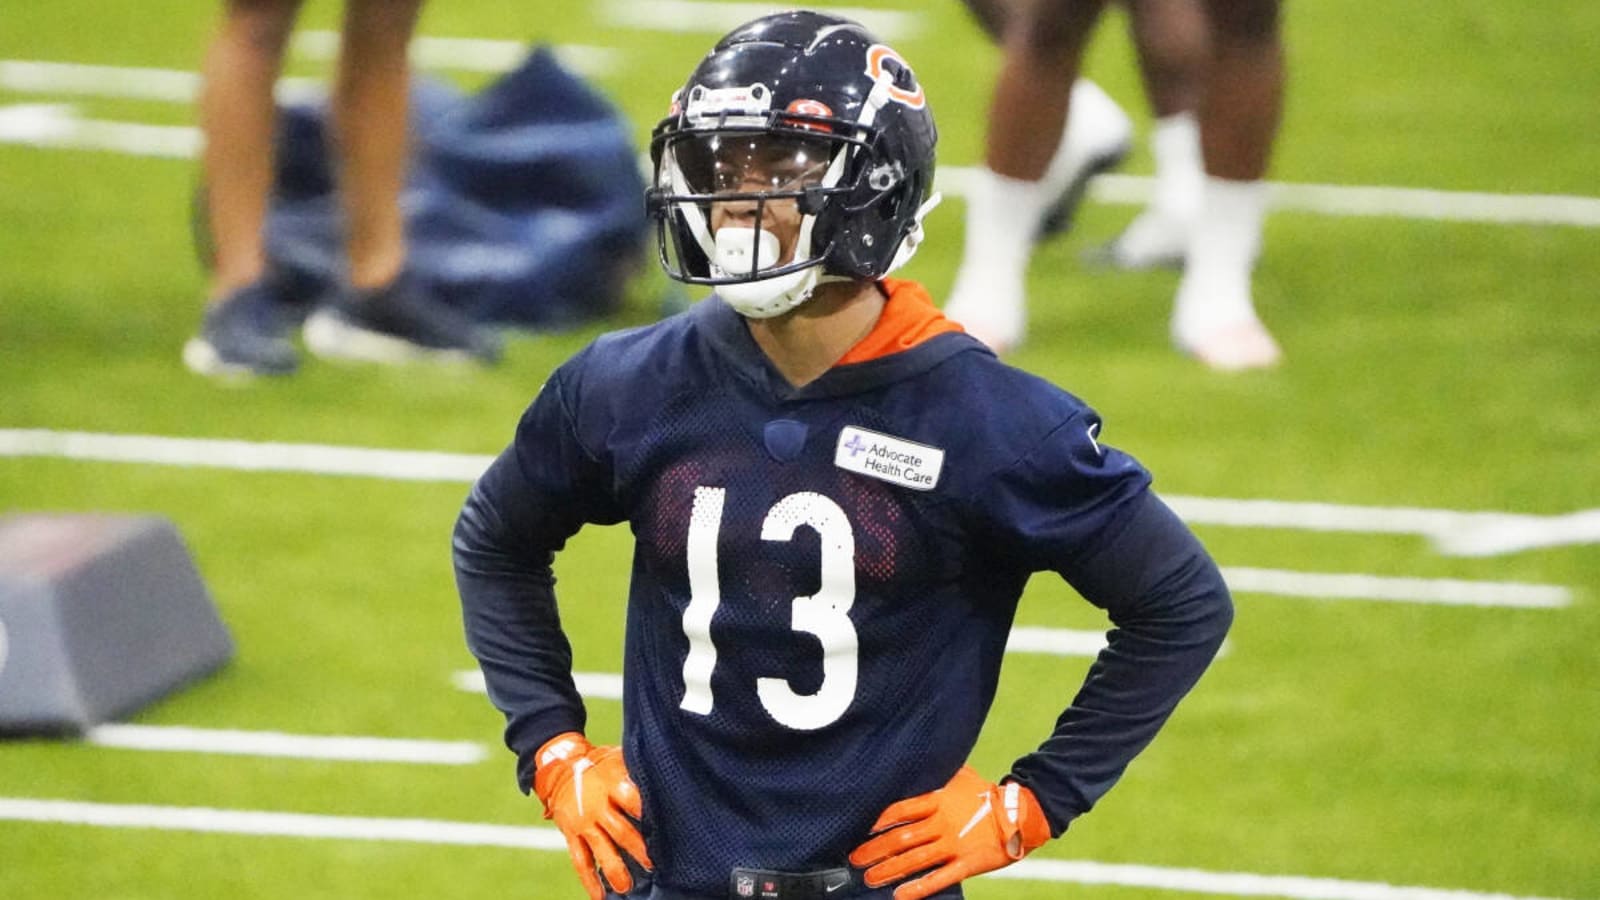 7 returning Chicago Bears players that fans should be excited to watch take the field at OTAs